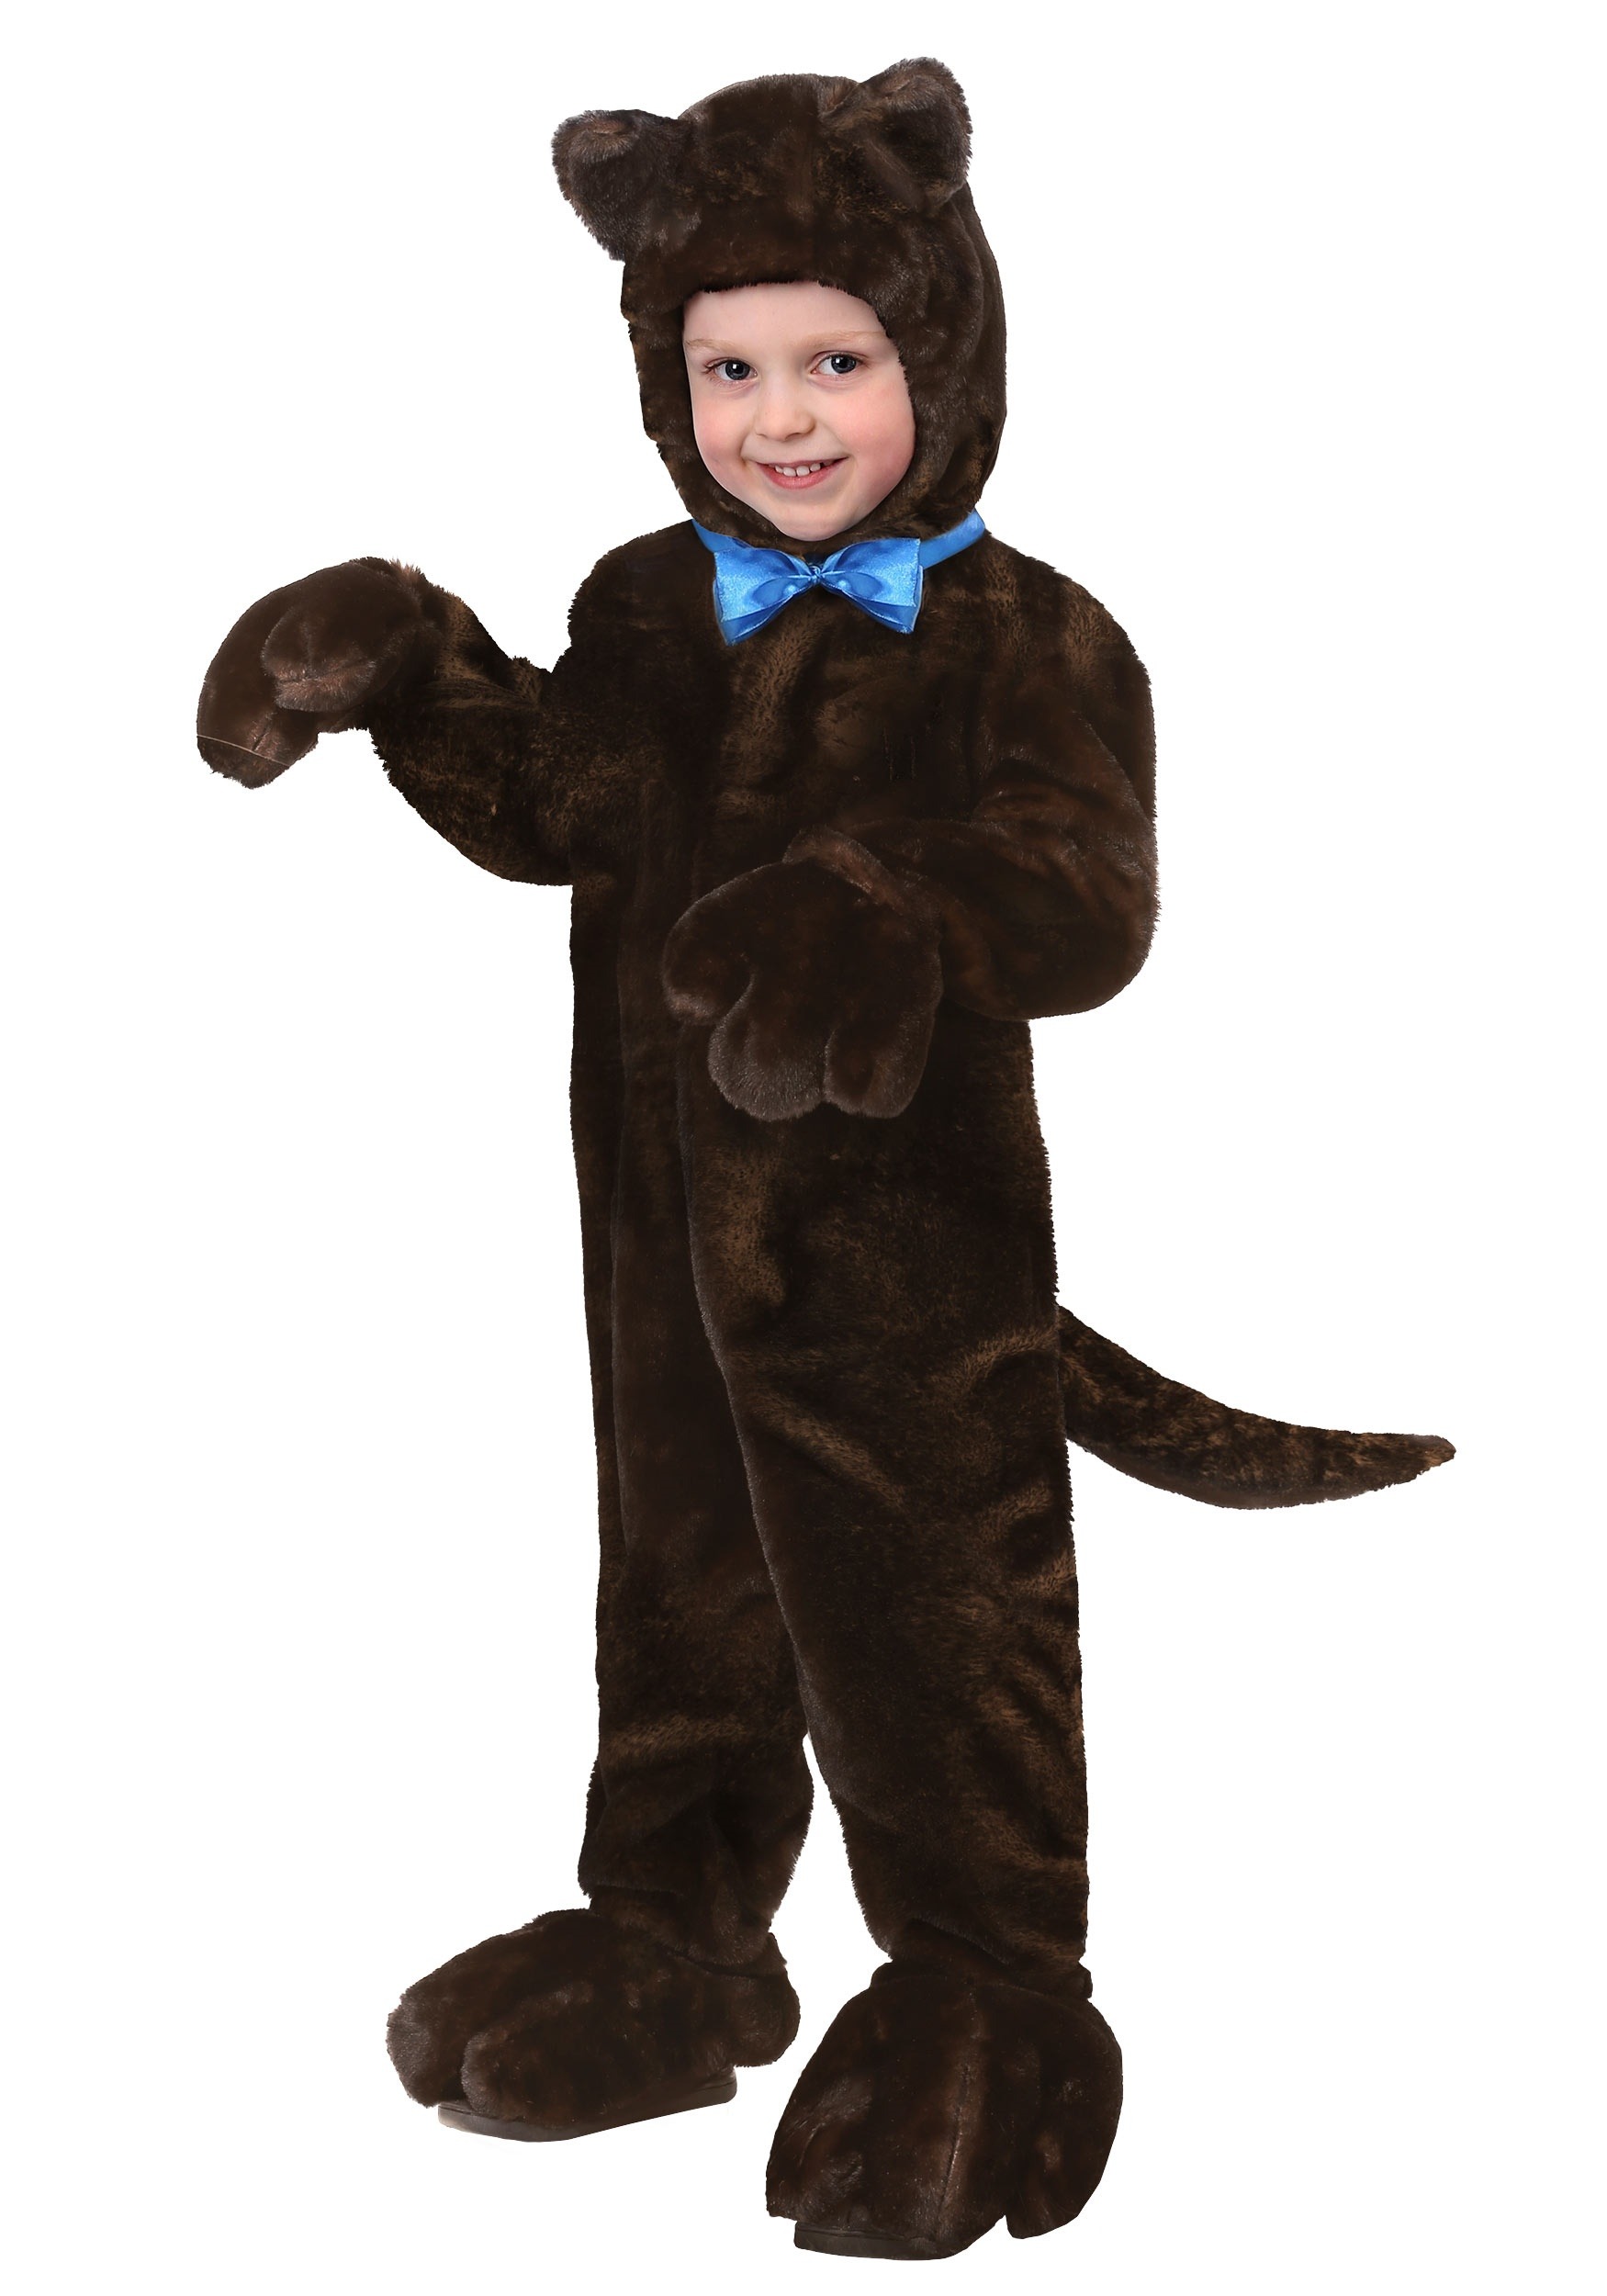 Photos - Fancy Dress Deluxe FUN Costumes  Brown Dog Toddler Costume Brown/Blue FUN6432TD 